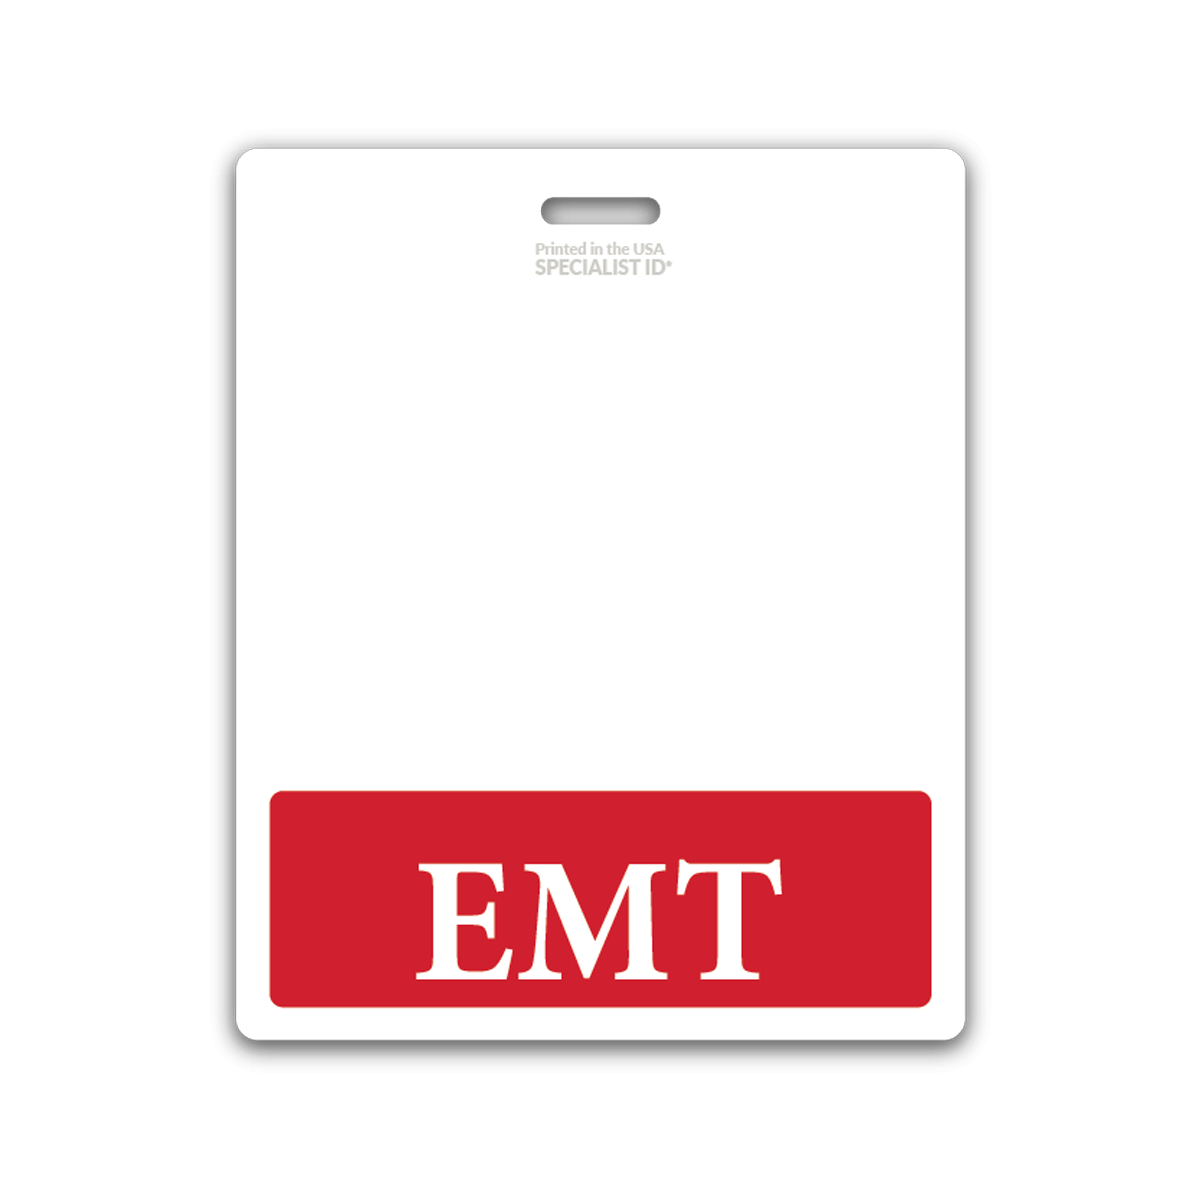 Extra Large and Long EMT Badge Buddy with Red Border - Double Side Print